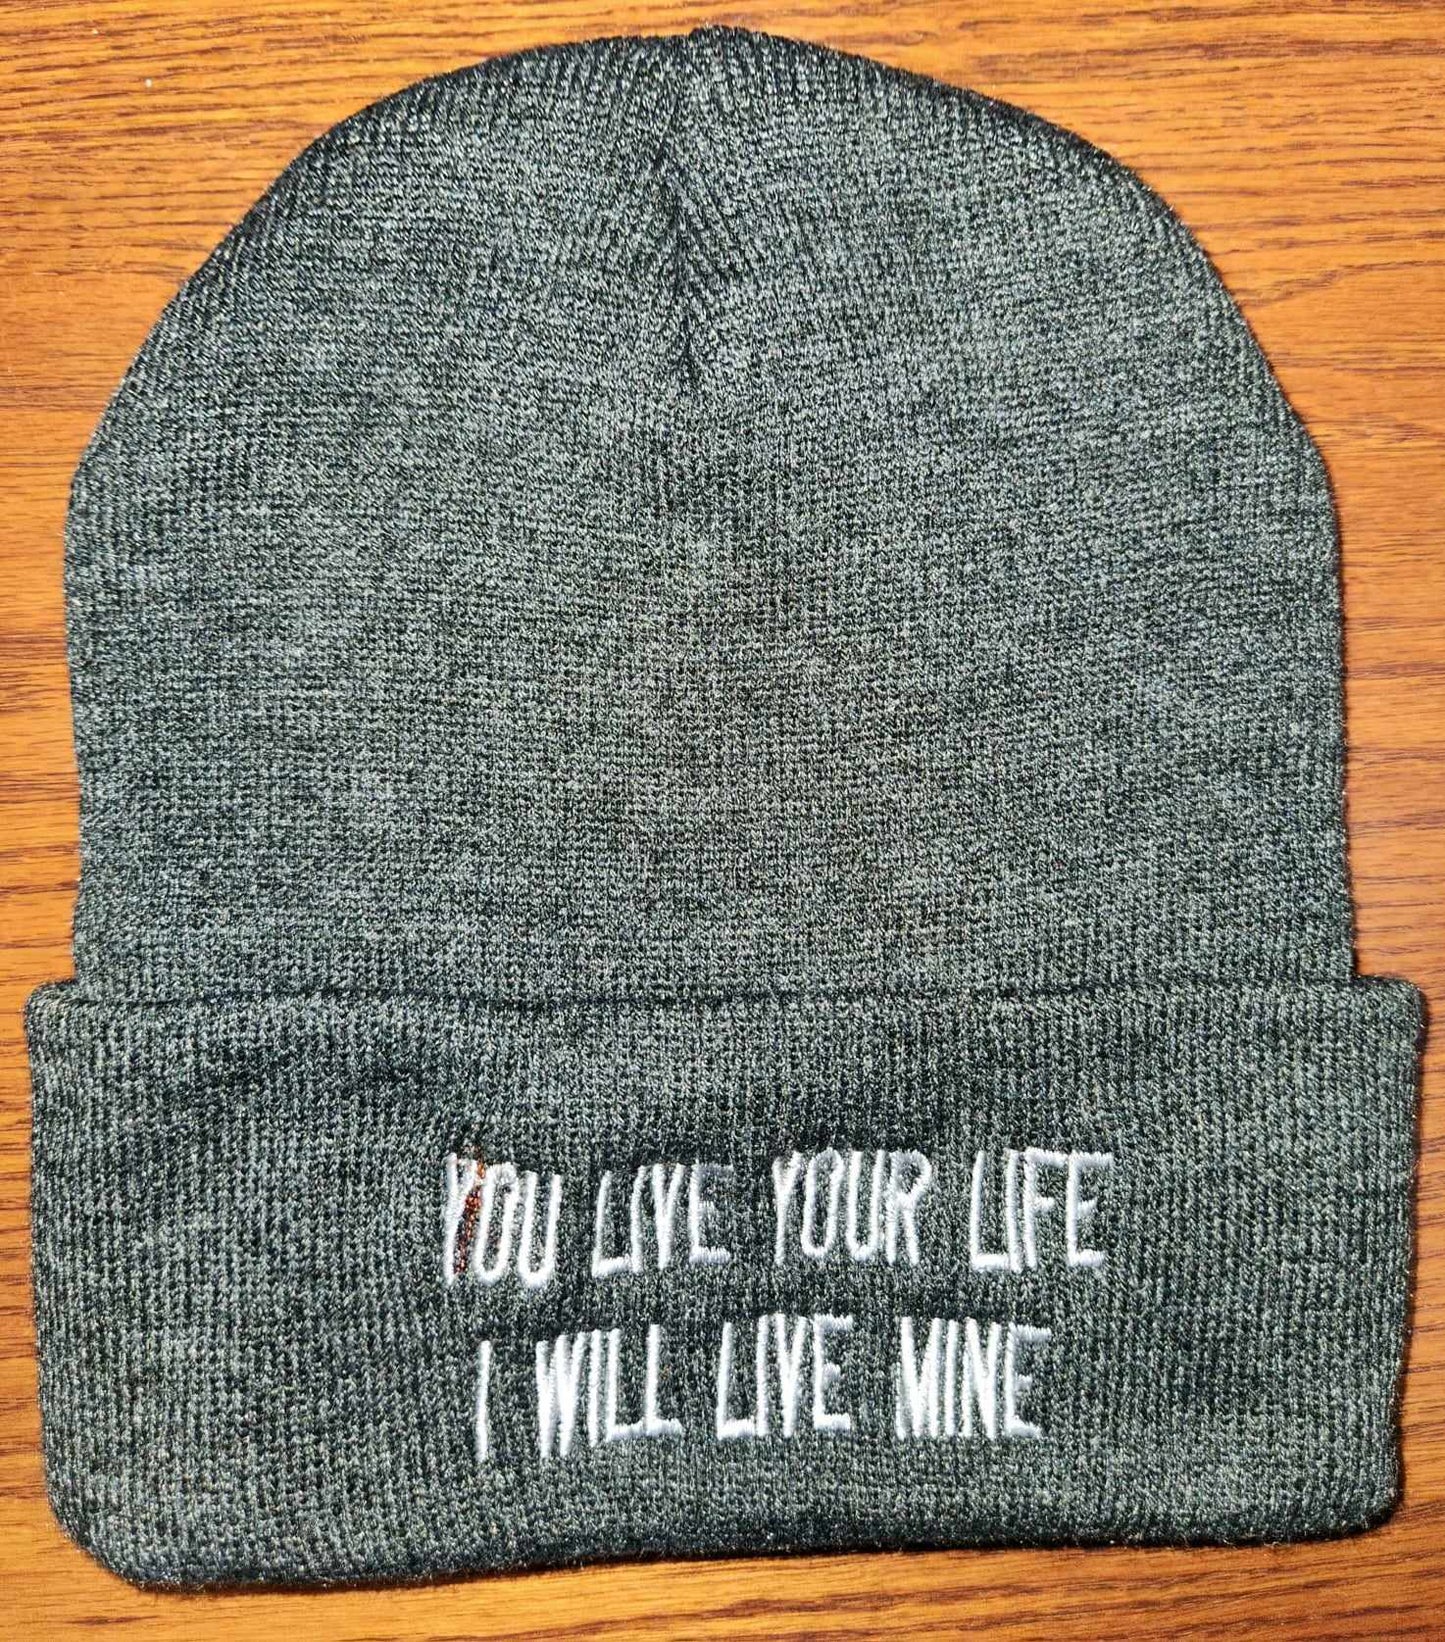 You Live Your Life I Will Live Mine Toques